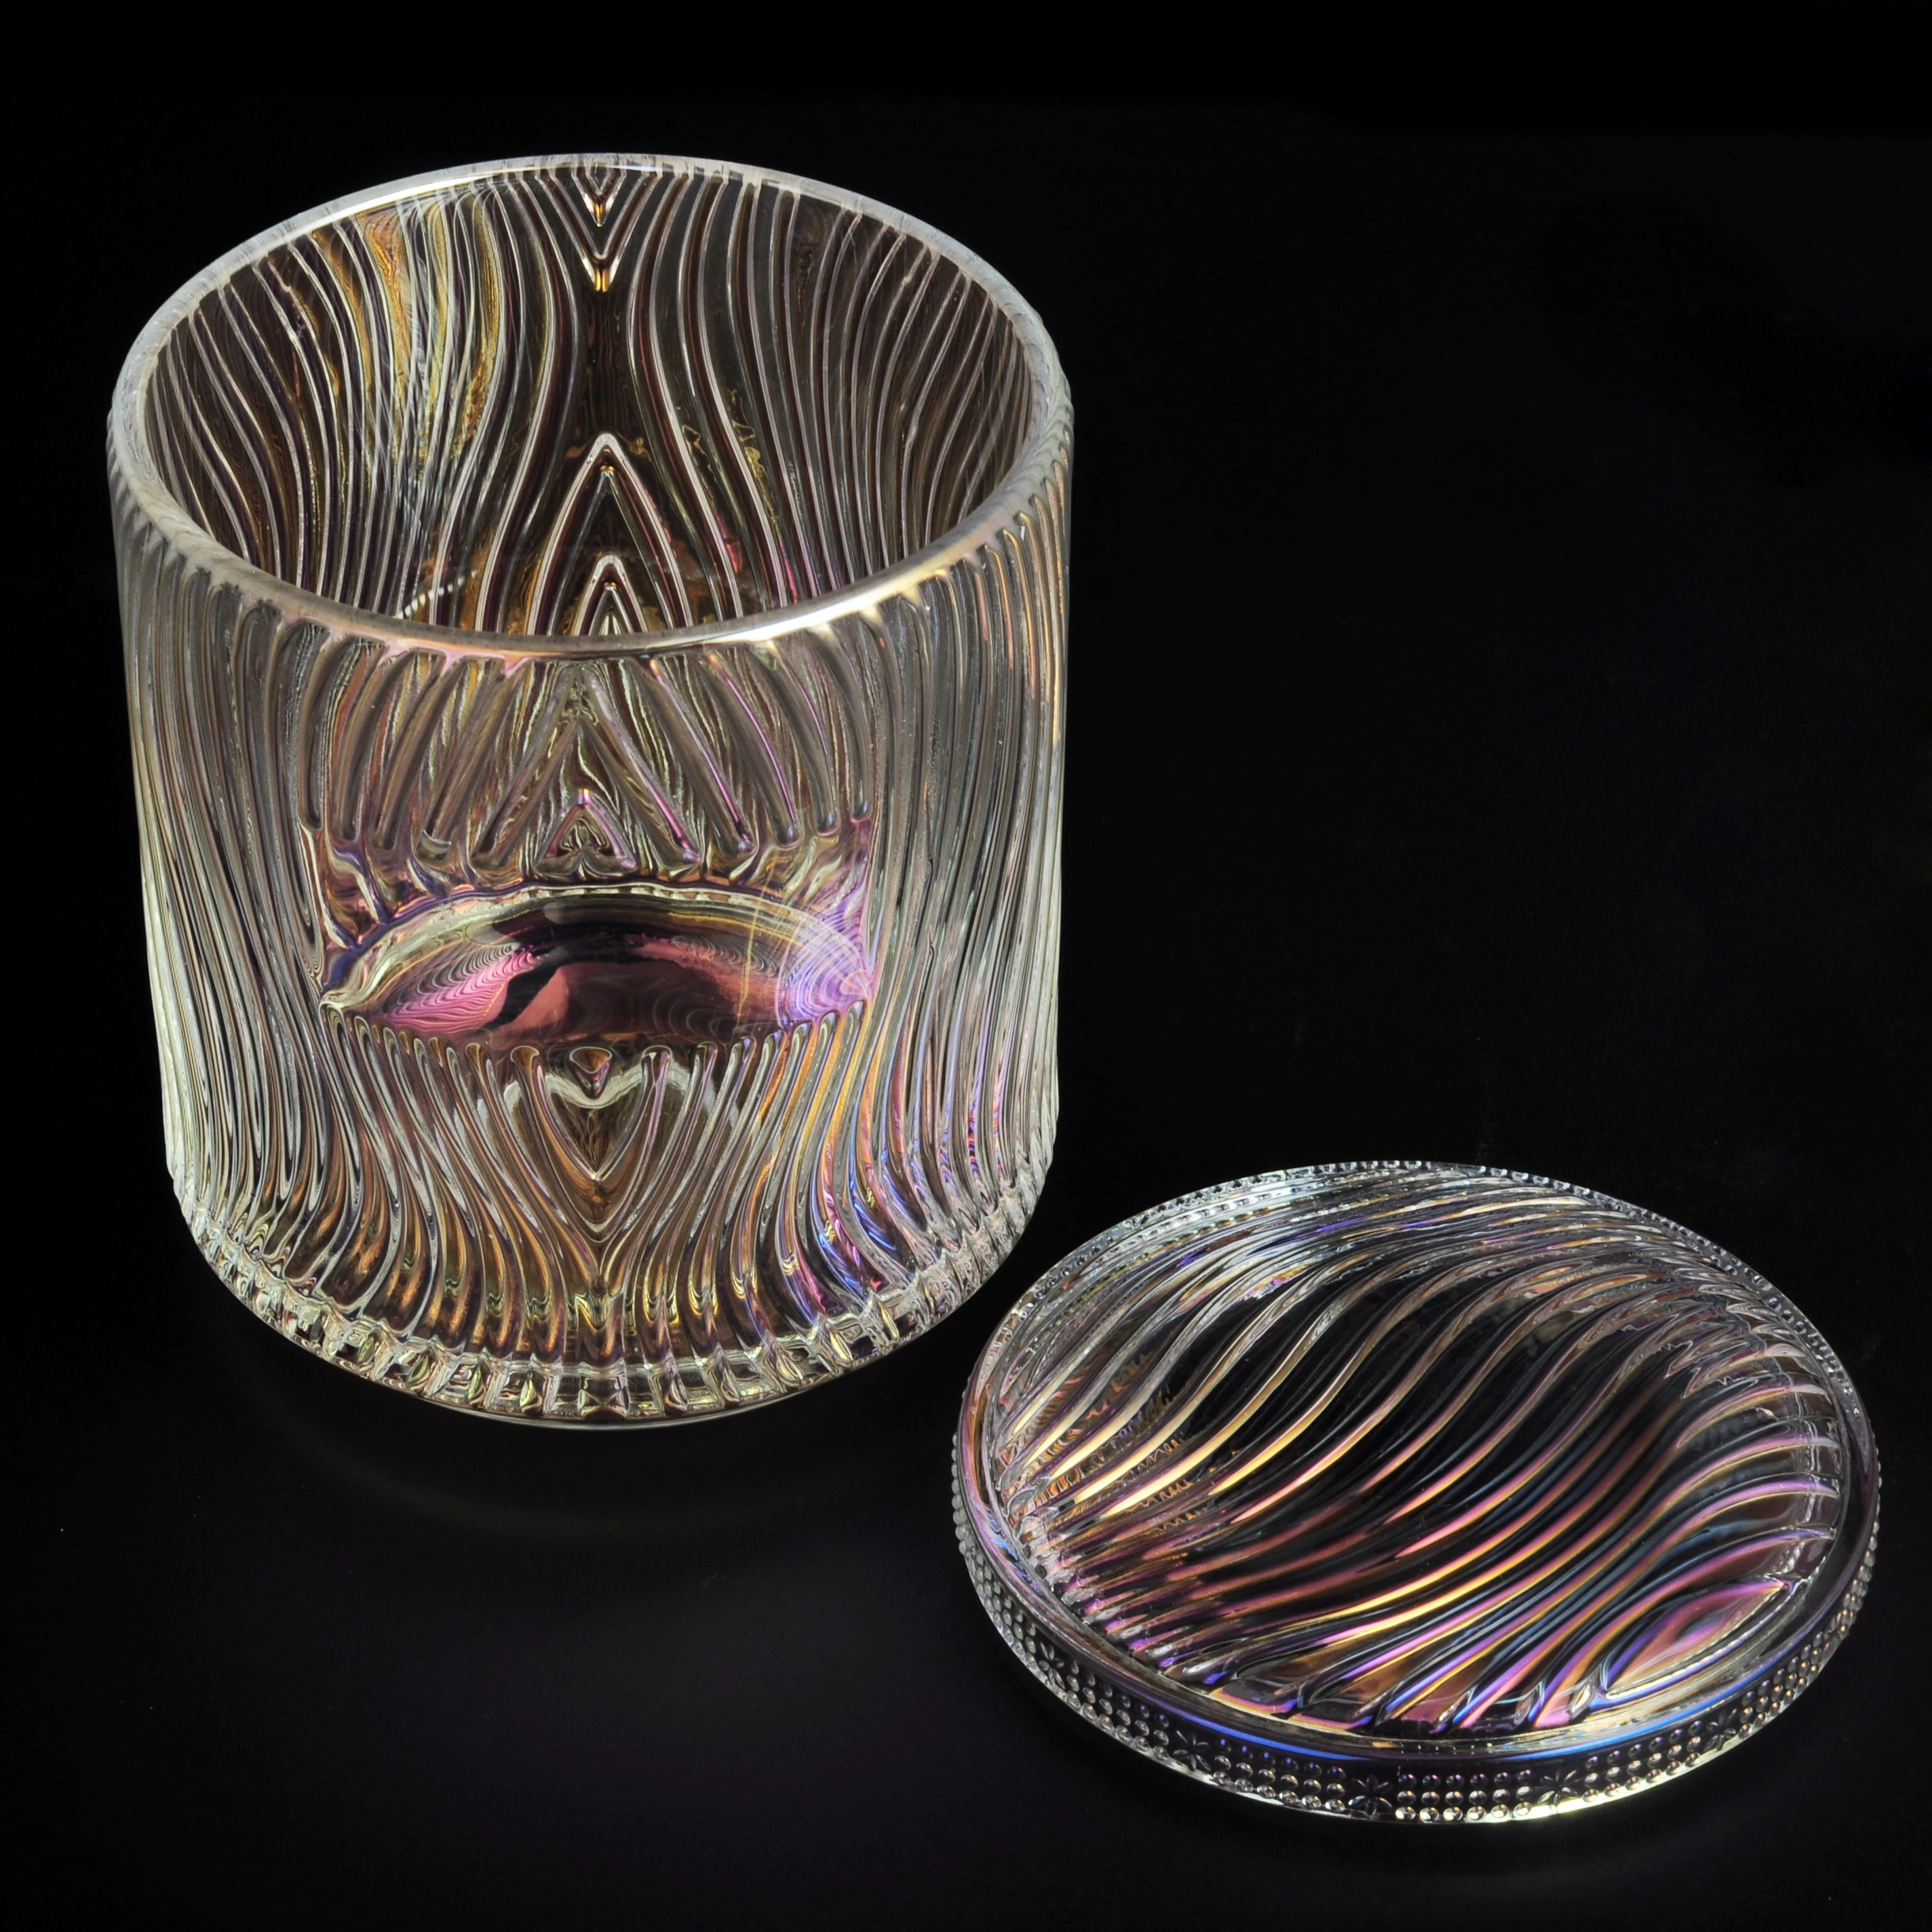 translucent glass candle jar with glass lid, iridescent glass candle holder